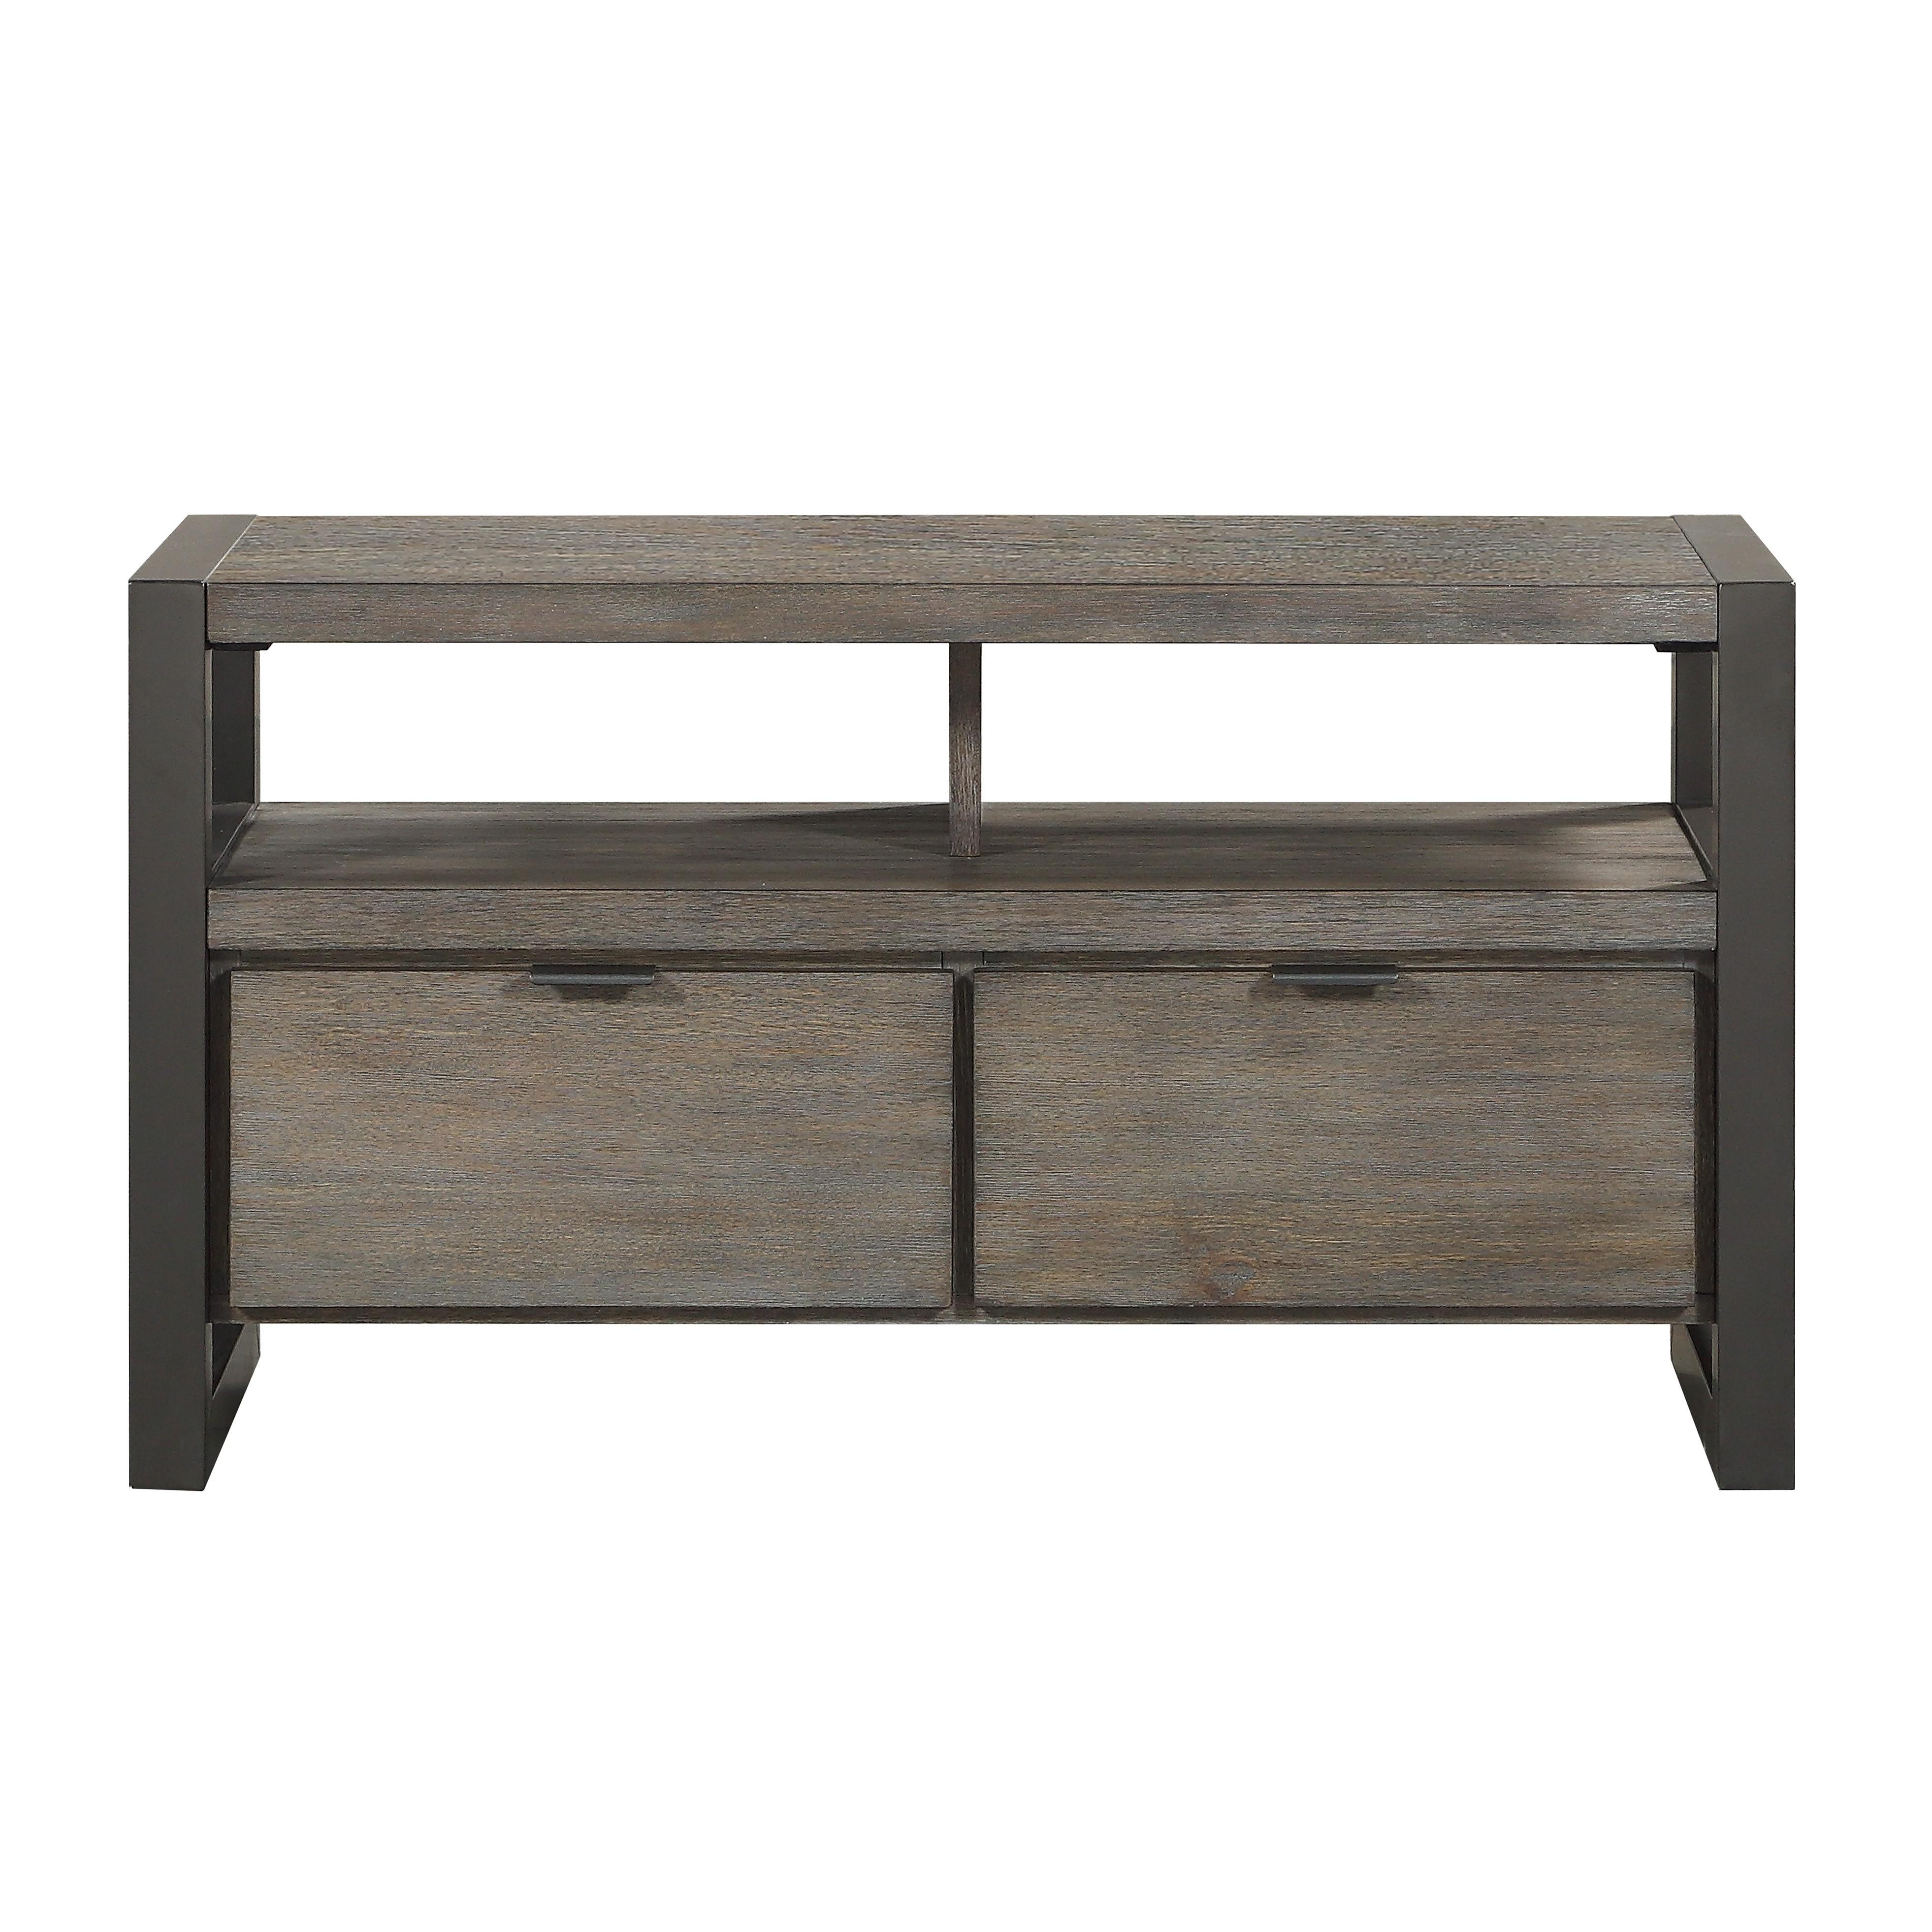 Transitional TV Stand 4550-40T Prudhoe 4550-40T in Oak 